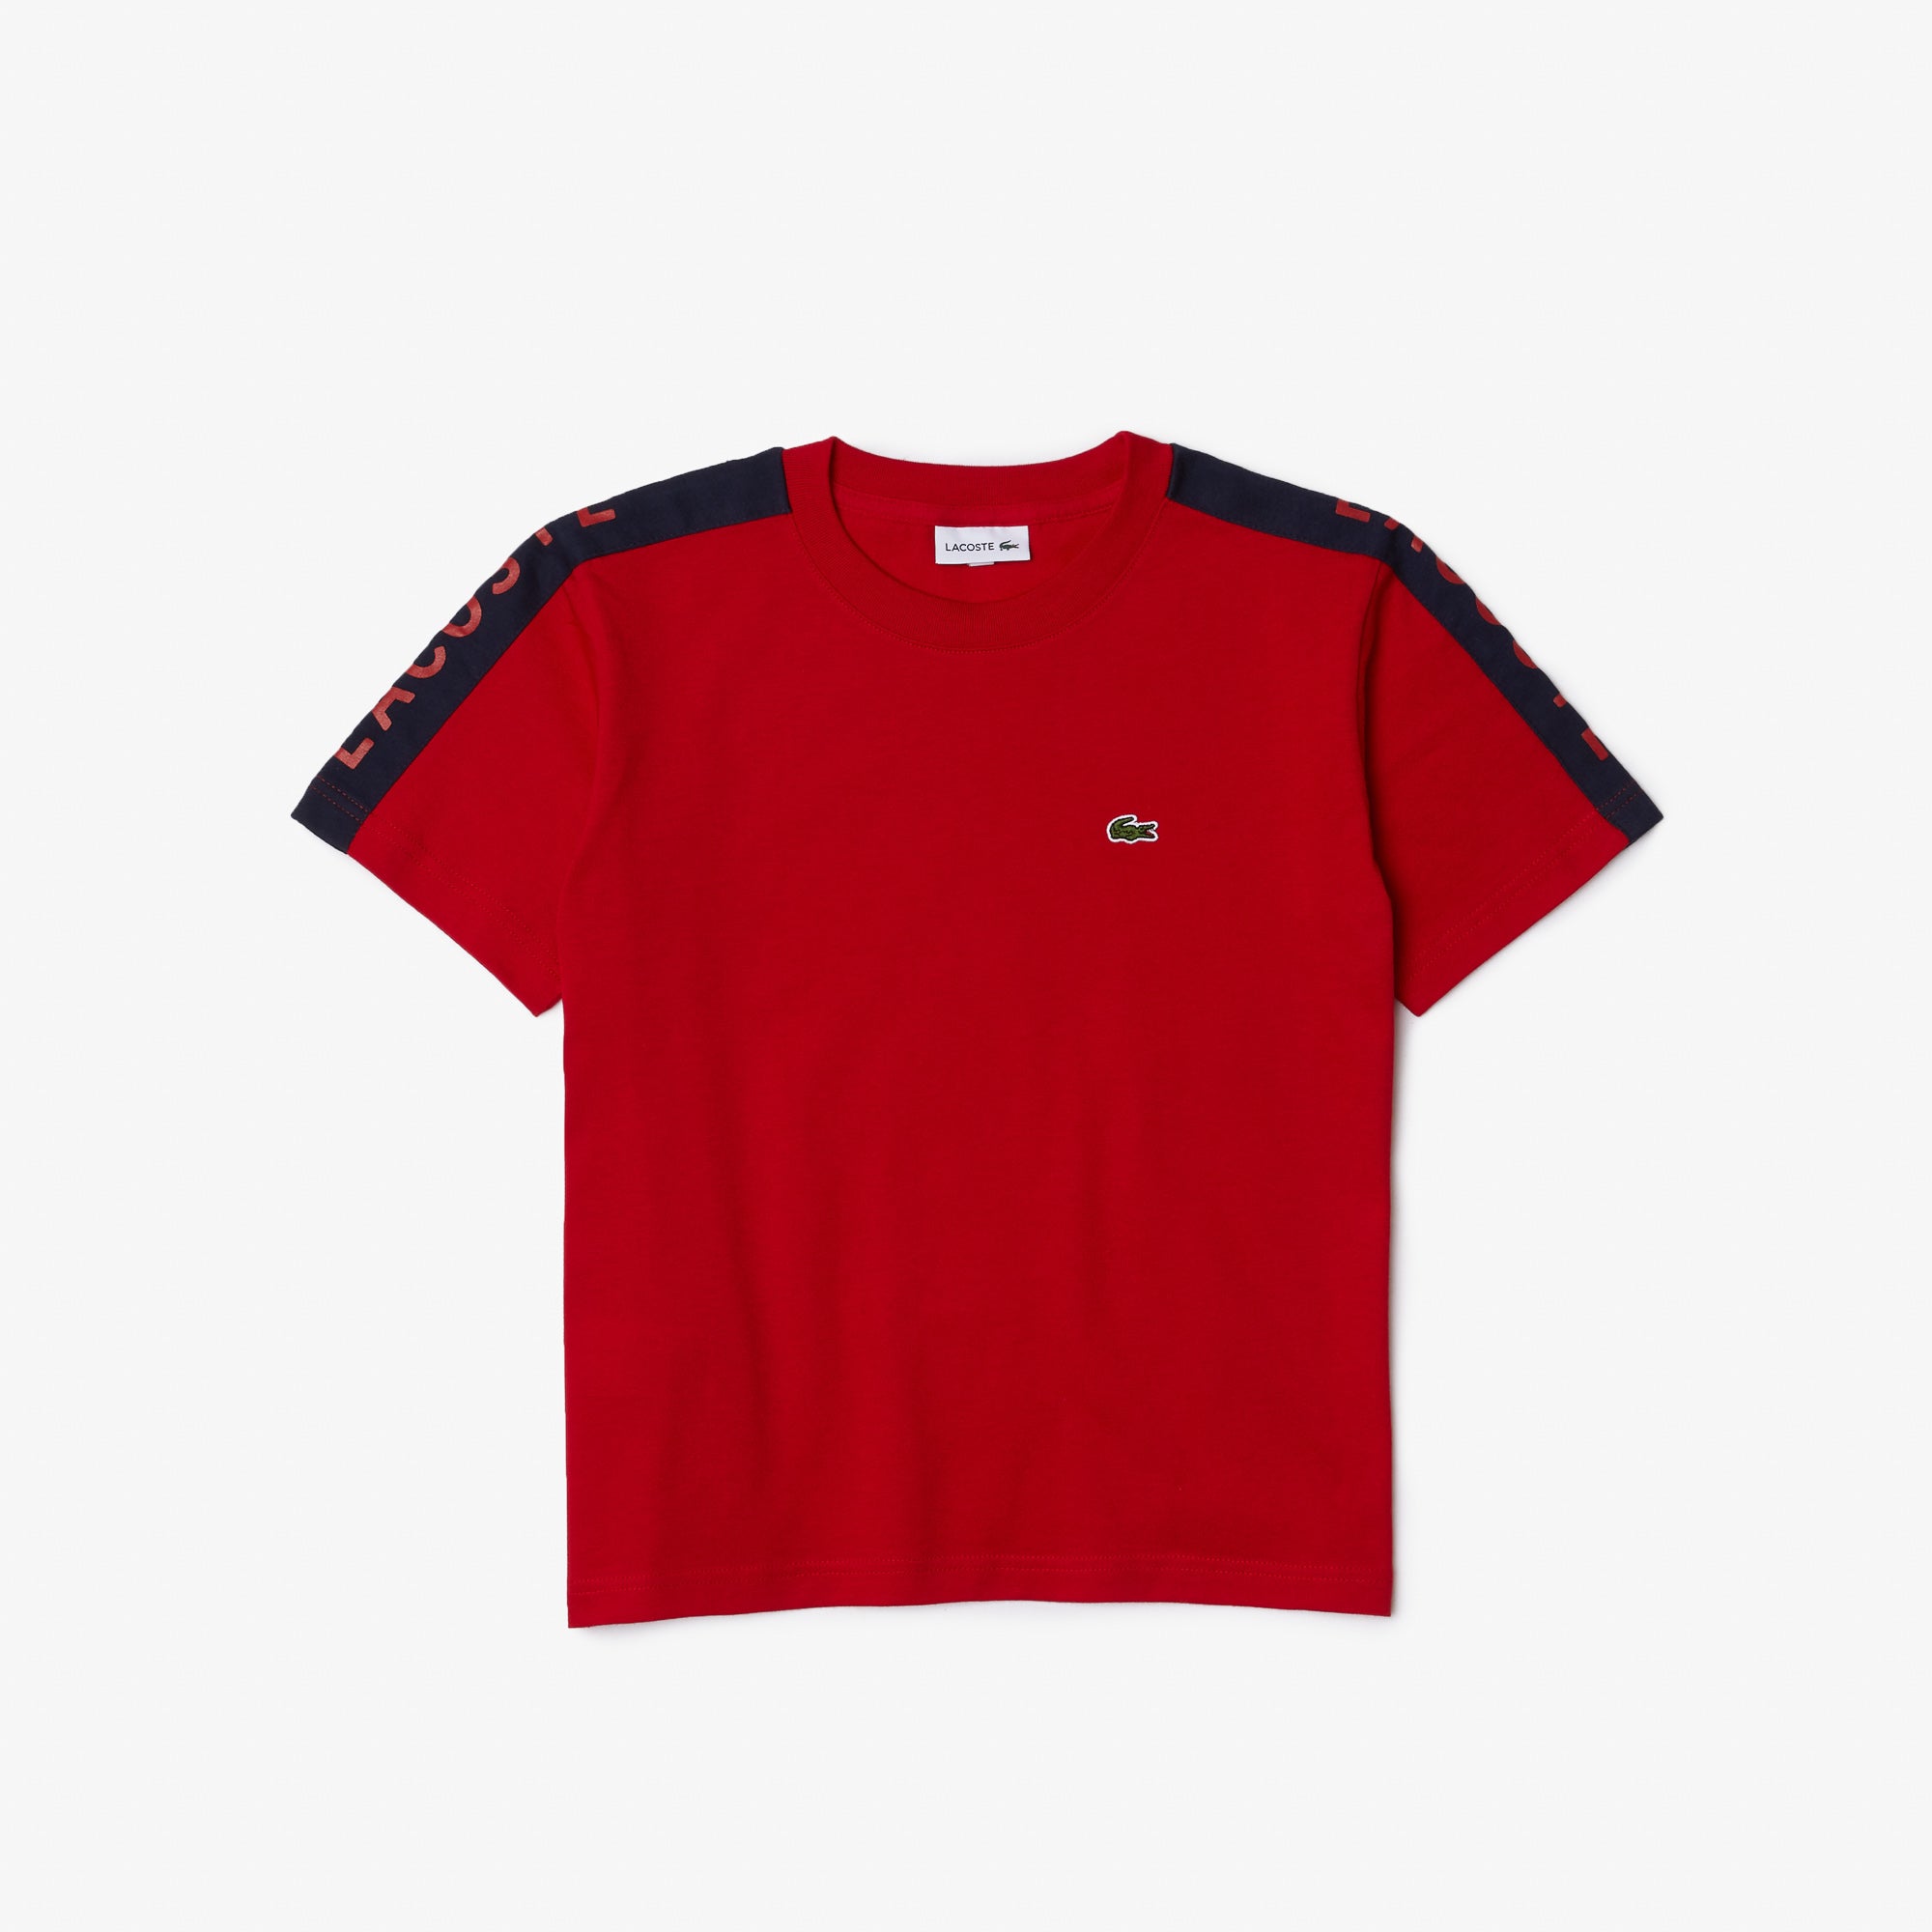 KID'S LACOSTE CREW NECK LETTERED BANDS COTTON T-SHIRT (RED/NAVY)